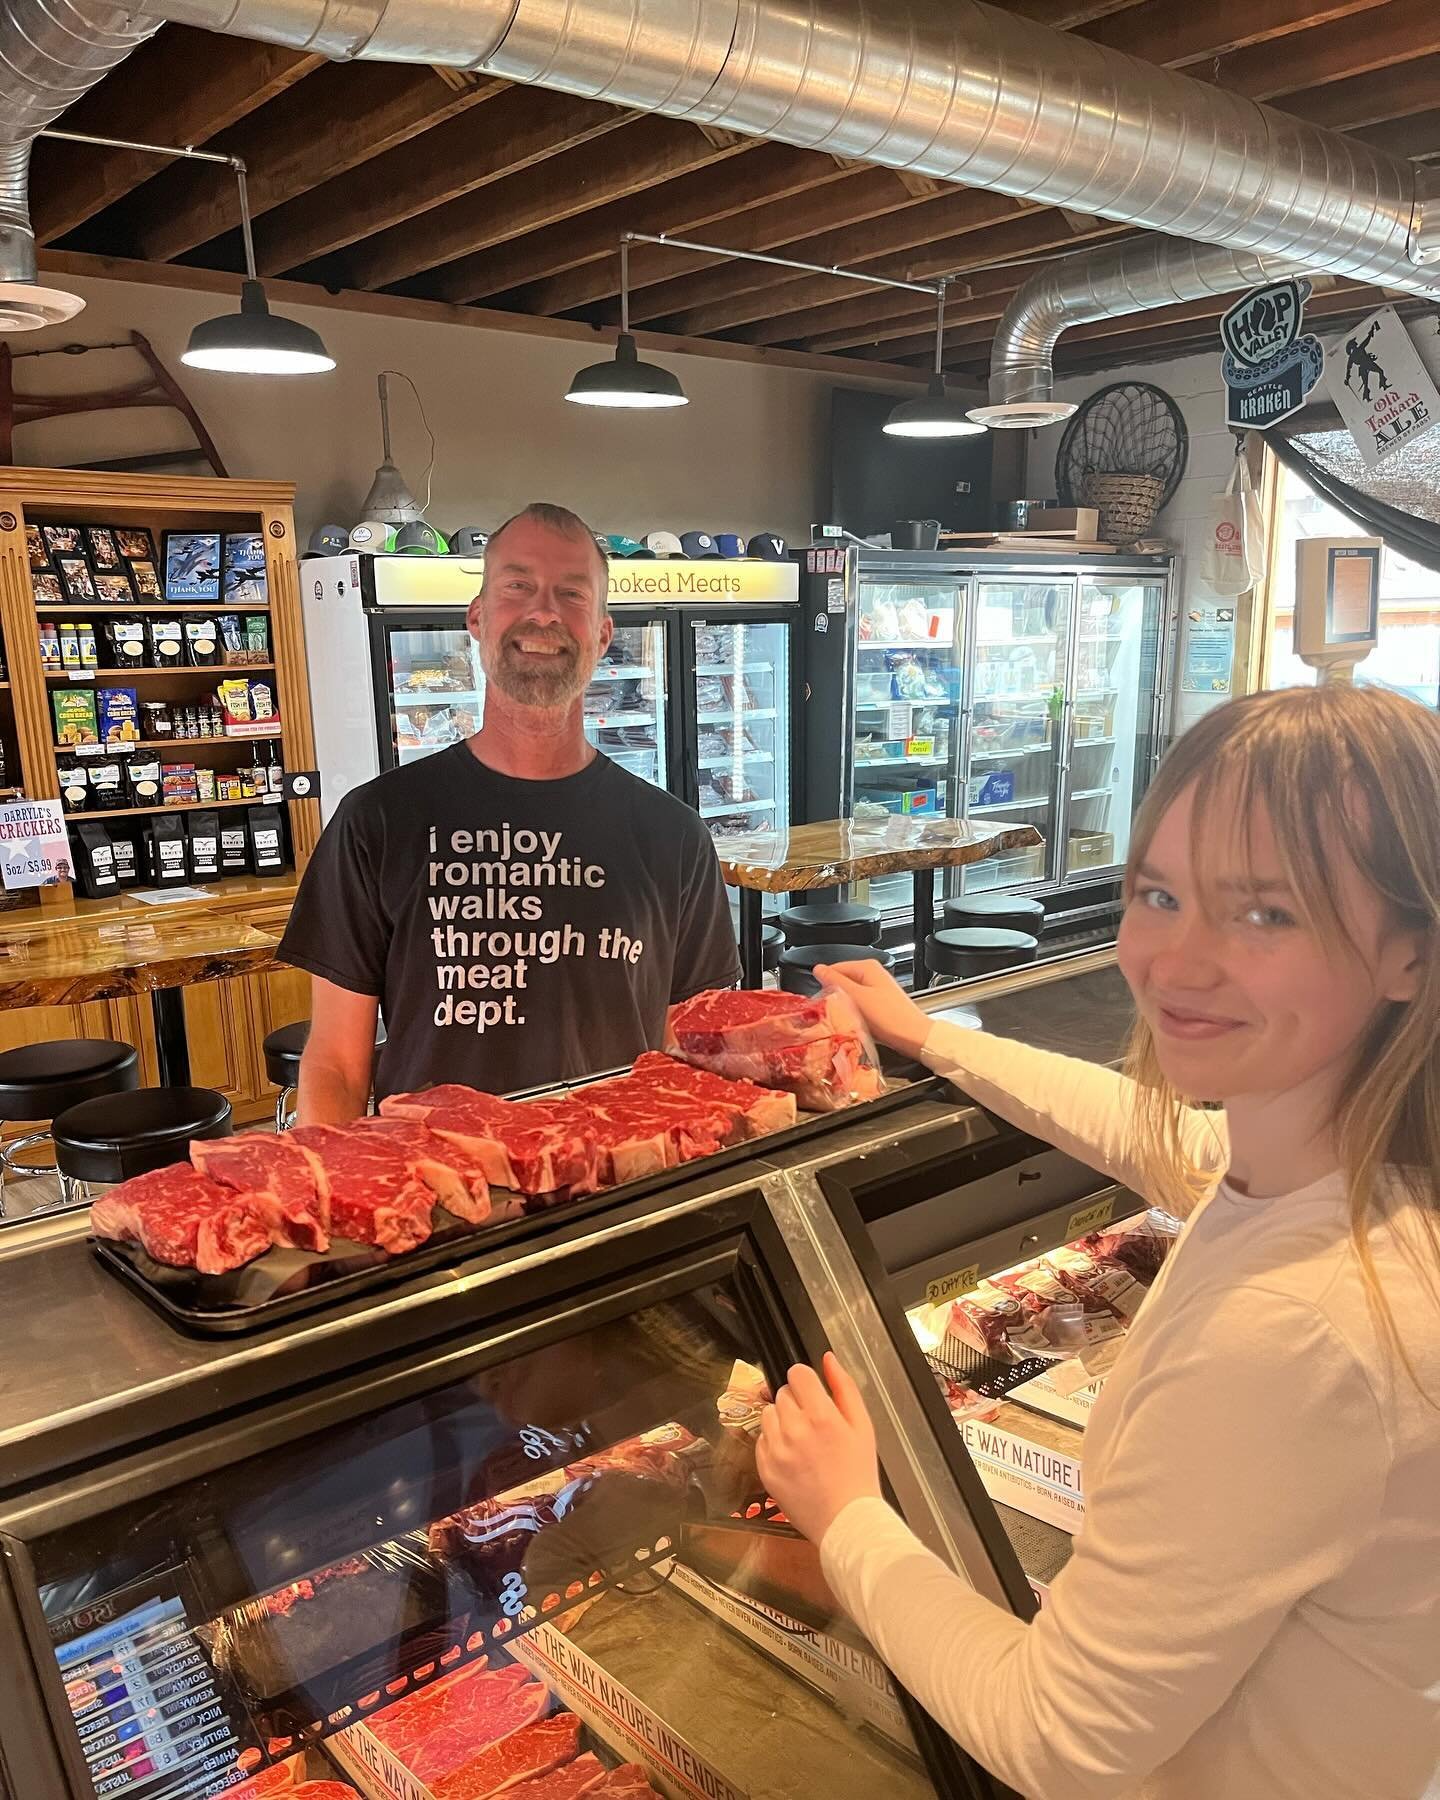 The perfect shirt doesn&rsquo;t exis- . . . . oh wait🤪🥩 Brisket will be off the smoker and ready to go at 4pm today. Head on down and pick some up - guaranteed to walk out of here with as big of a smile as our friend here! #erniesqualitymeatsandwin